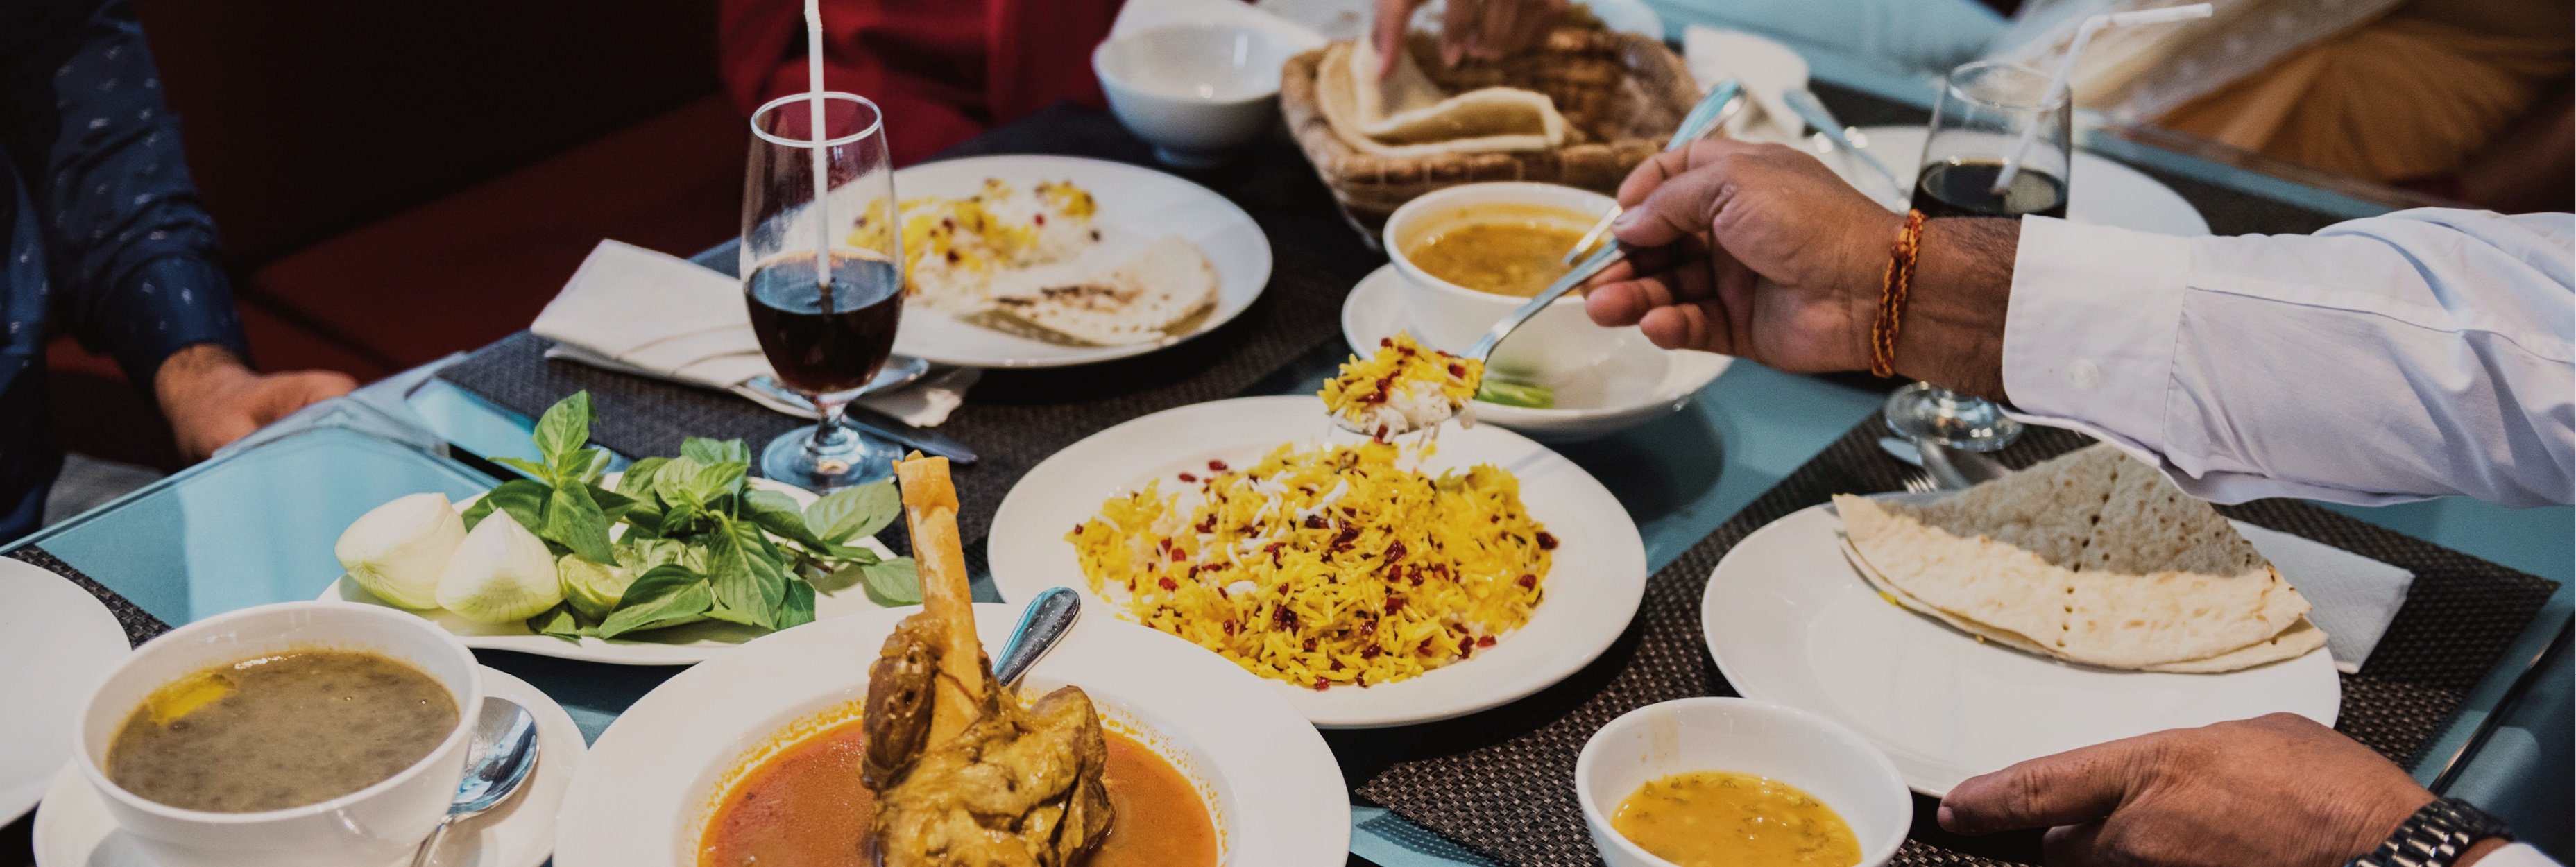 3 top factors that cause food waste in the UAE’s hospitality industry